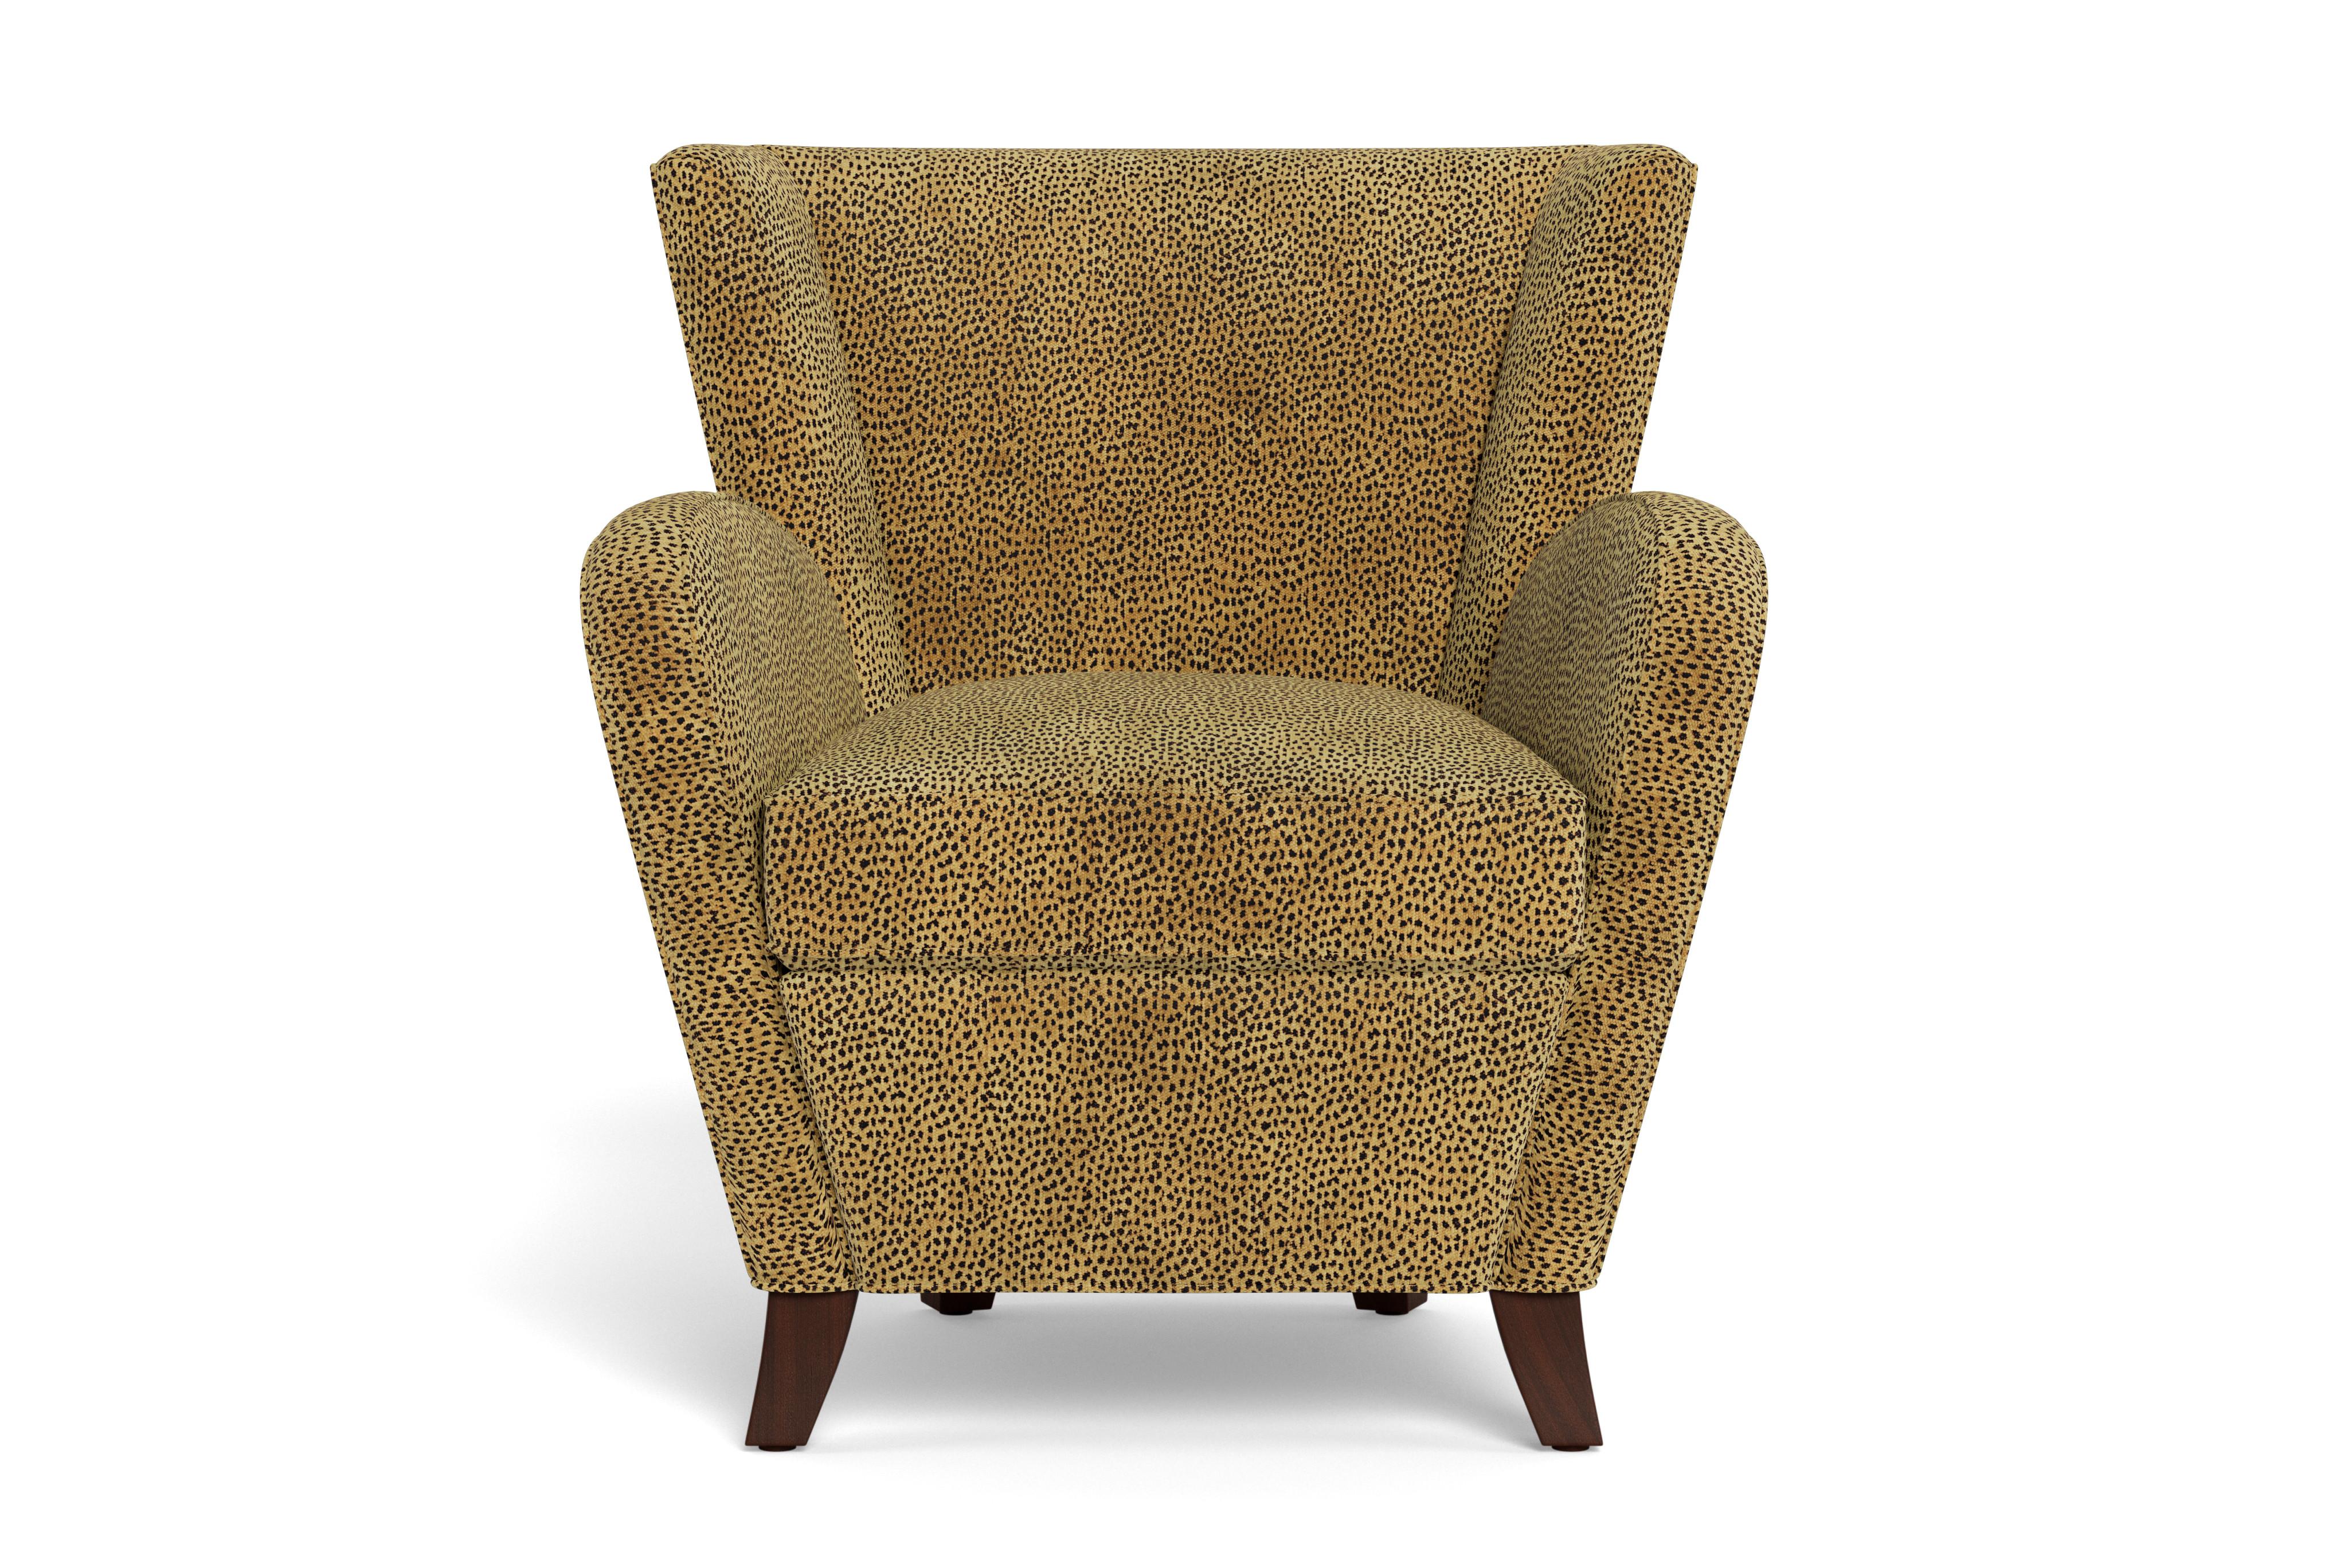 French chic updated, this sophisticated little chair cuts a curvaceous silhouette. Feminine and compact, this wing chair is thoughtfully crafted and it shows in every detail: a luxurious deep seat that totally envelops you, classic tailoring, plump